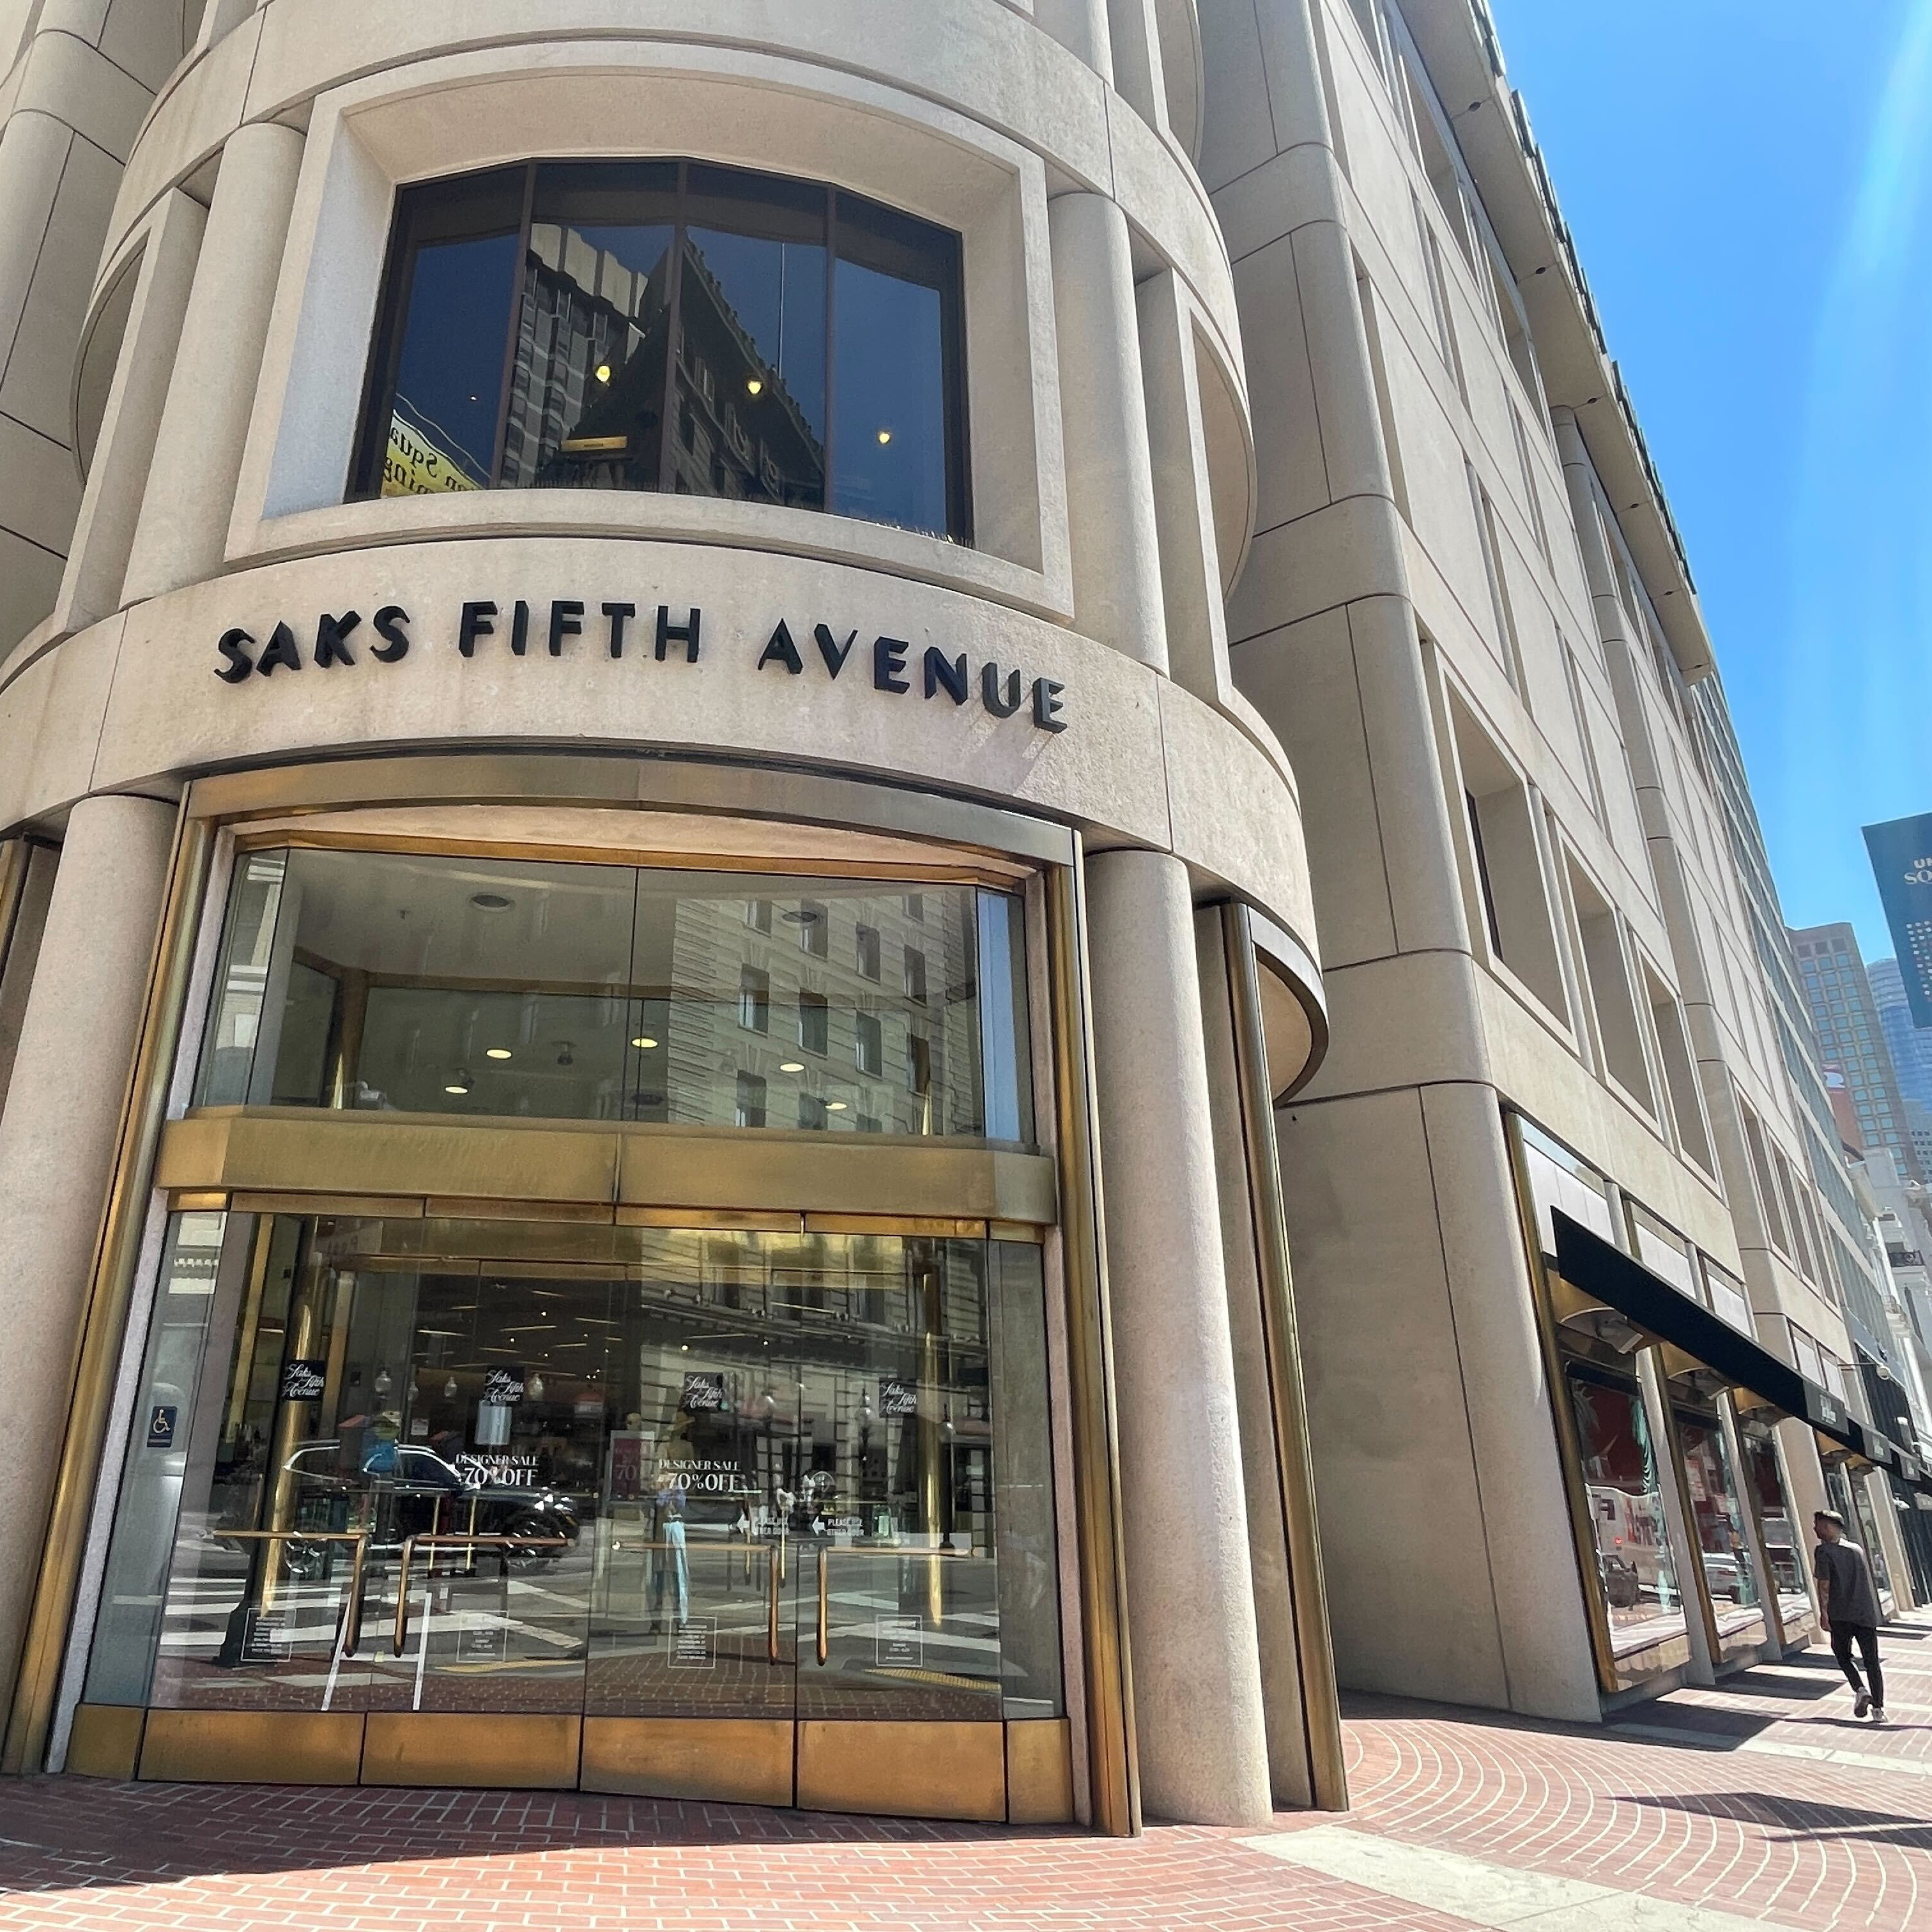 A person walks by on the right of the entrance of a big store, with the words Saks Fifth Avenue on the building